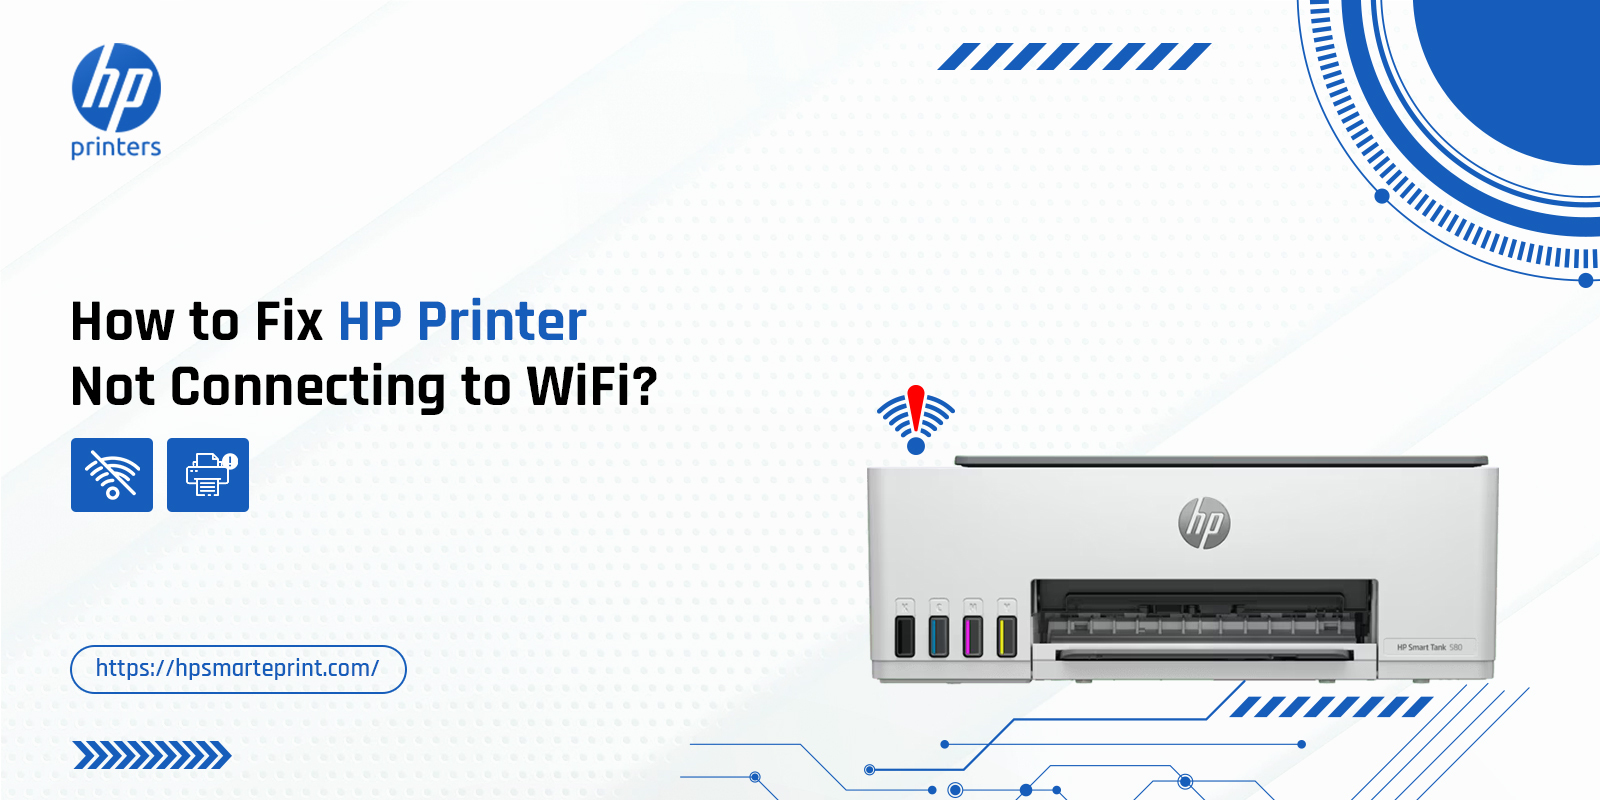 How To Fix HP Printer Not Connecting To WiFi? - Hp Printer Setup